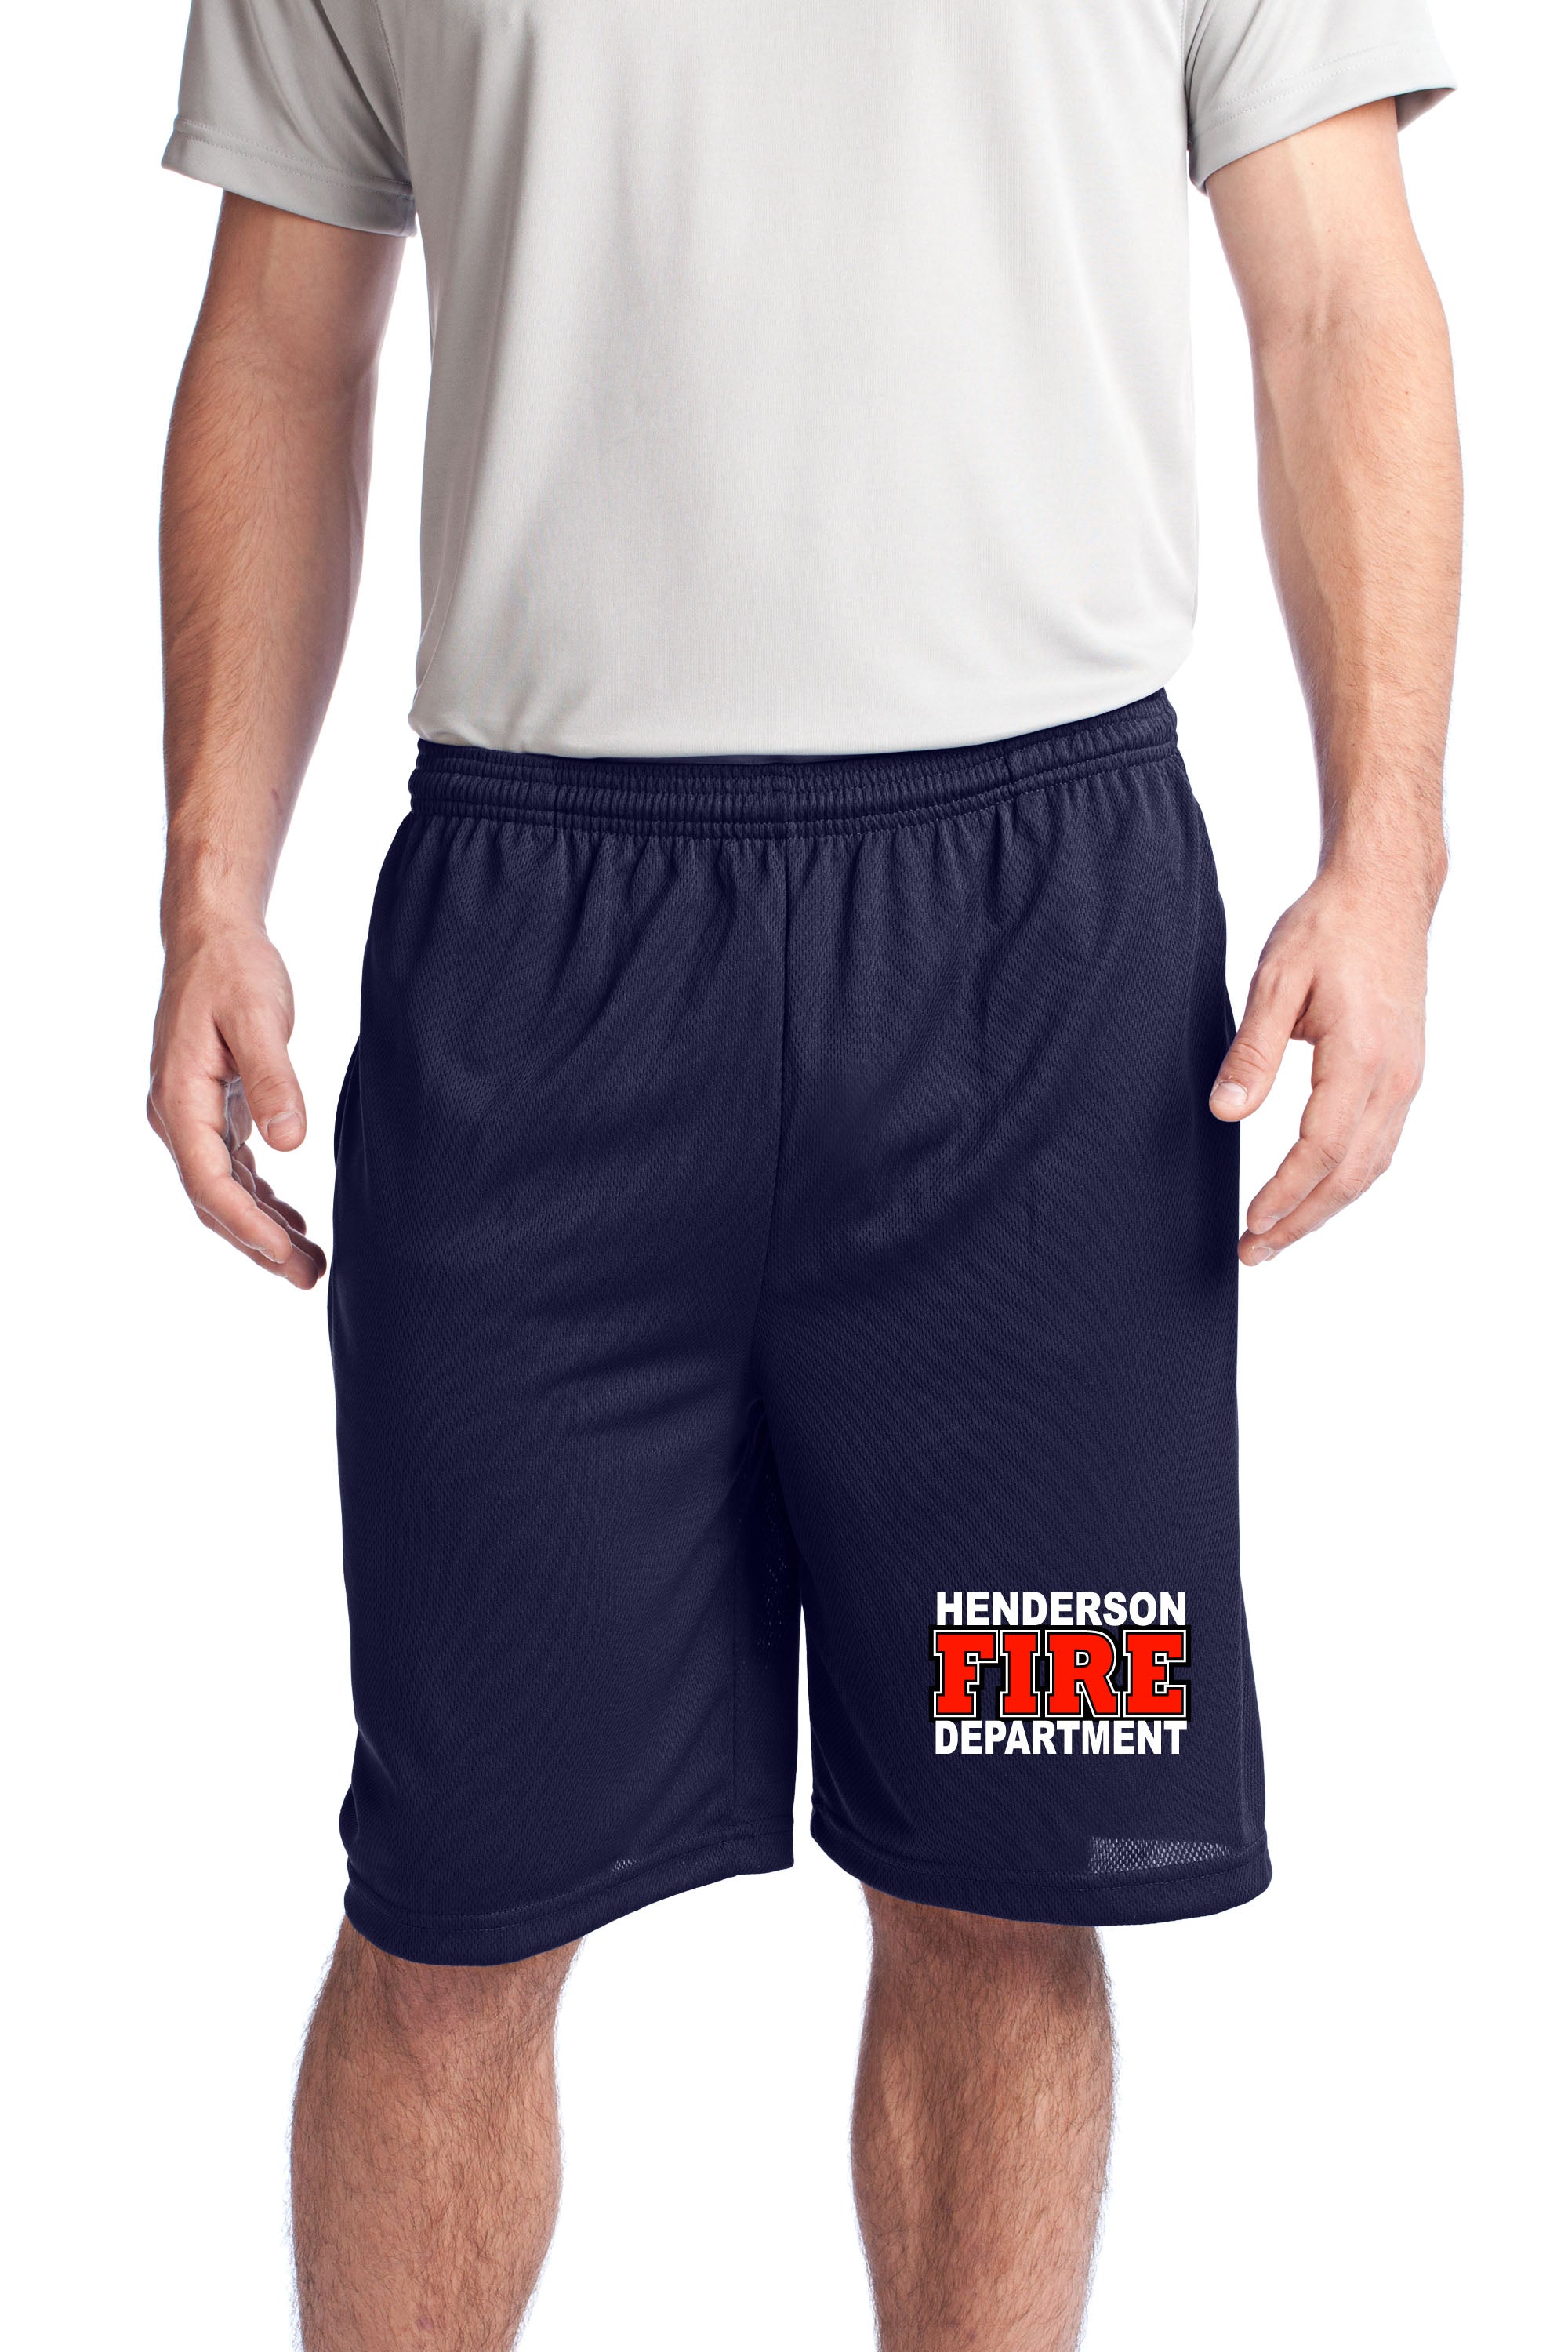 HFD (Henderson Fire Department) Pocketed Poly OFF DUTY Workout Shorts